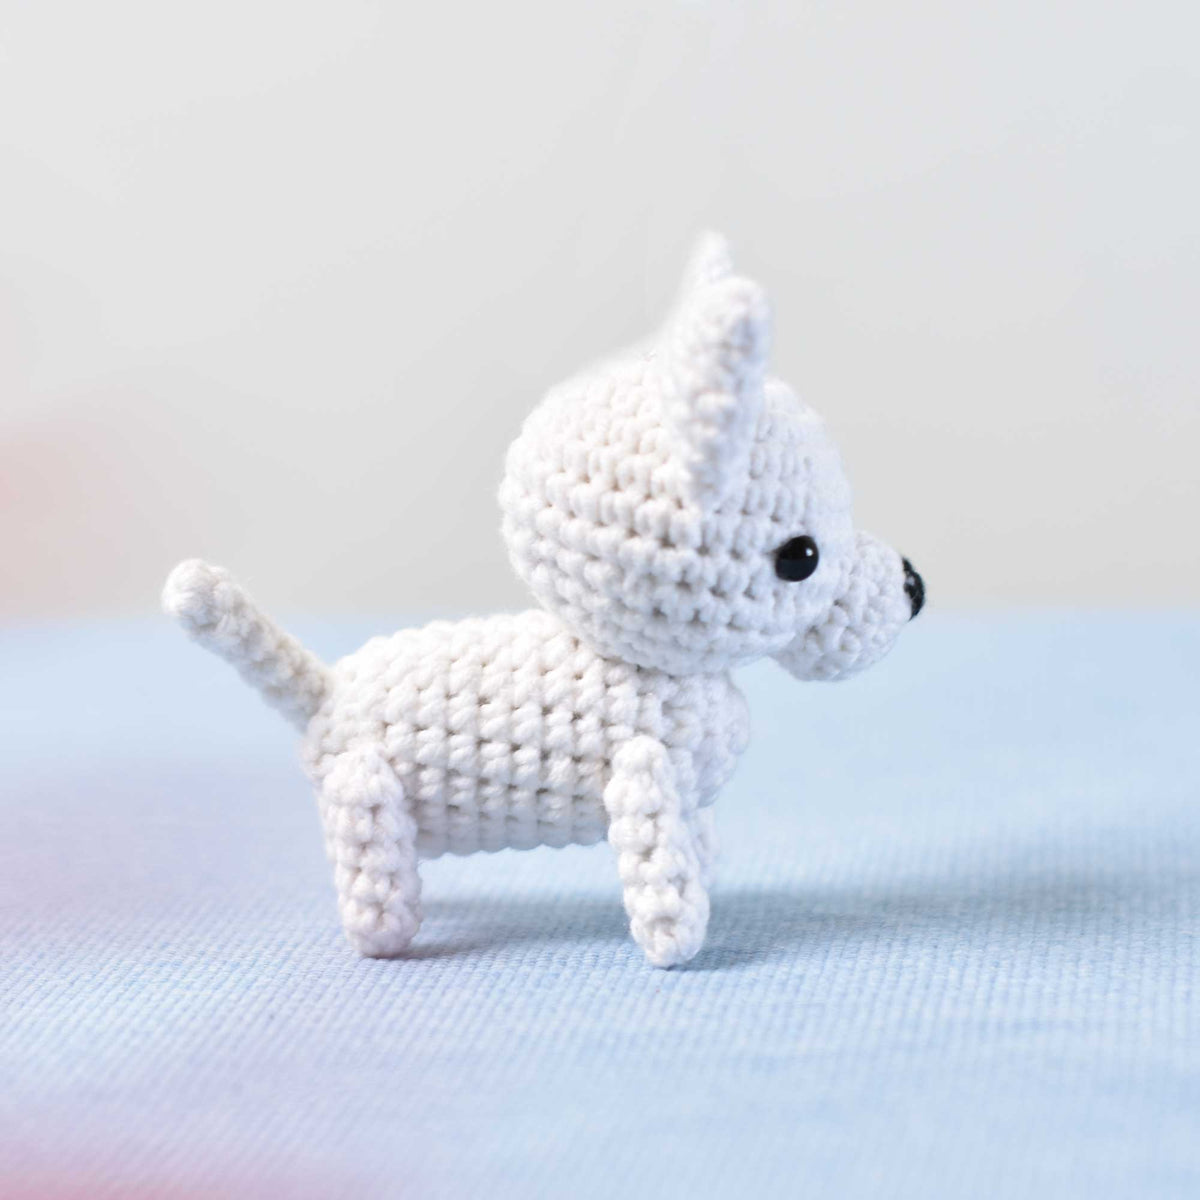 Chihuahua. Miniature crocheted dog. A puppy to order. Cute l